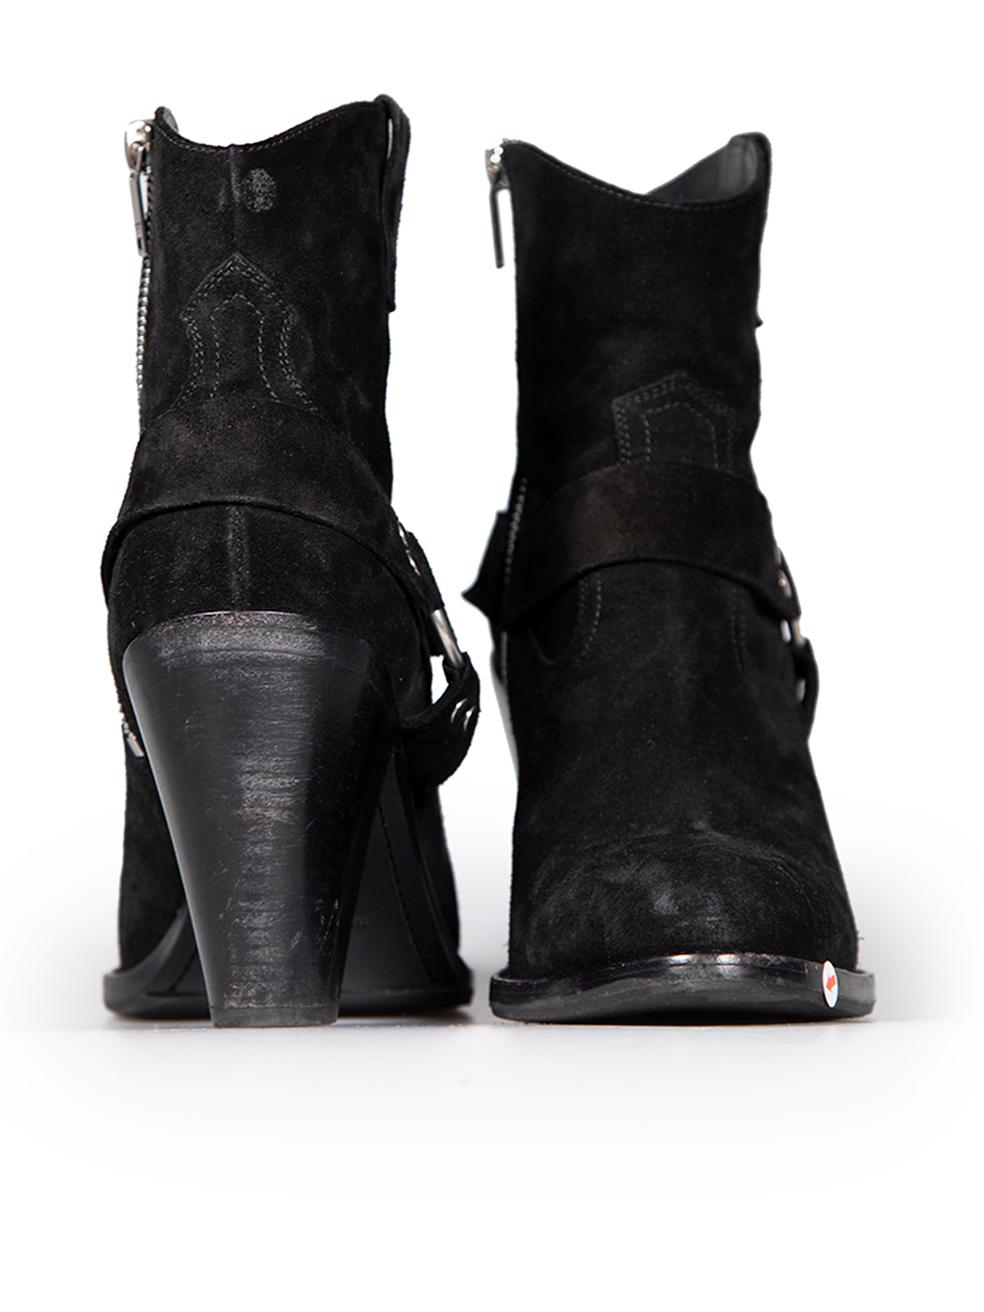 Saint Laurent Black Suede Buckle Detail Boots Size IT 39 In Good Condition For Sale In London, GB